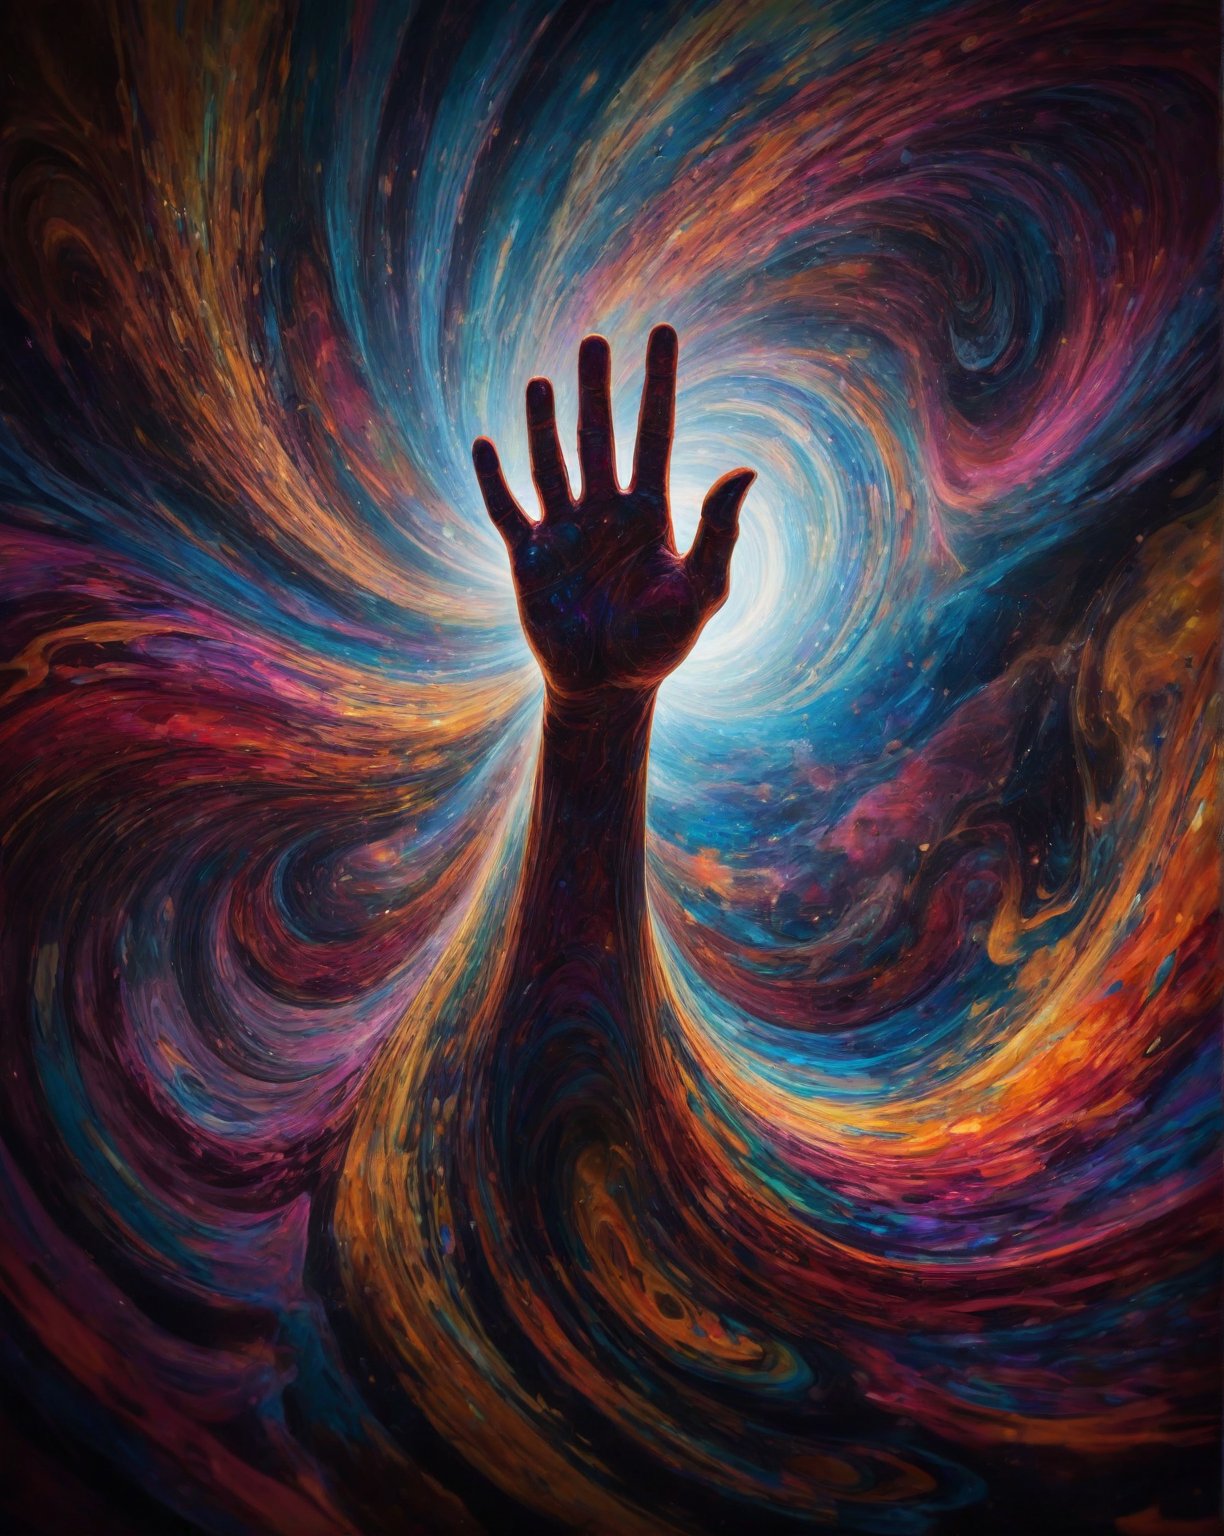 The image of god hand in a psychedelic surrealism style features swirling, vibrant colors that blend together in a dreamlike manner. god hand figure is distorted and elongated, with exaggerated features that seem to morph and shift before the viewer's eyes. The composition is chaotic yet balanced, with a sense of movement and energy that pulls the viewer into the surreal world of the image. The lighting is intense and dramatic, casting deep shadows and highlighting the surreal elements of the scene. Overall, the image captures a sense of otherworldly beauty and mystique, drawing the viewer into a mesmerizing and hypnotic visual experience.